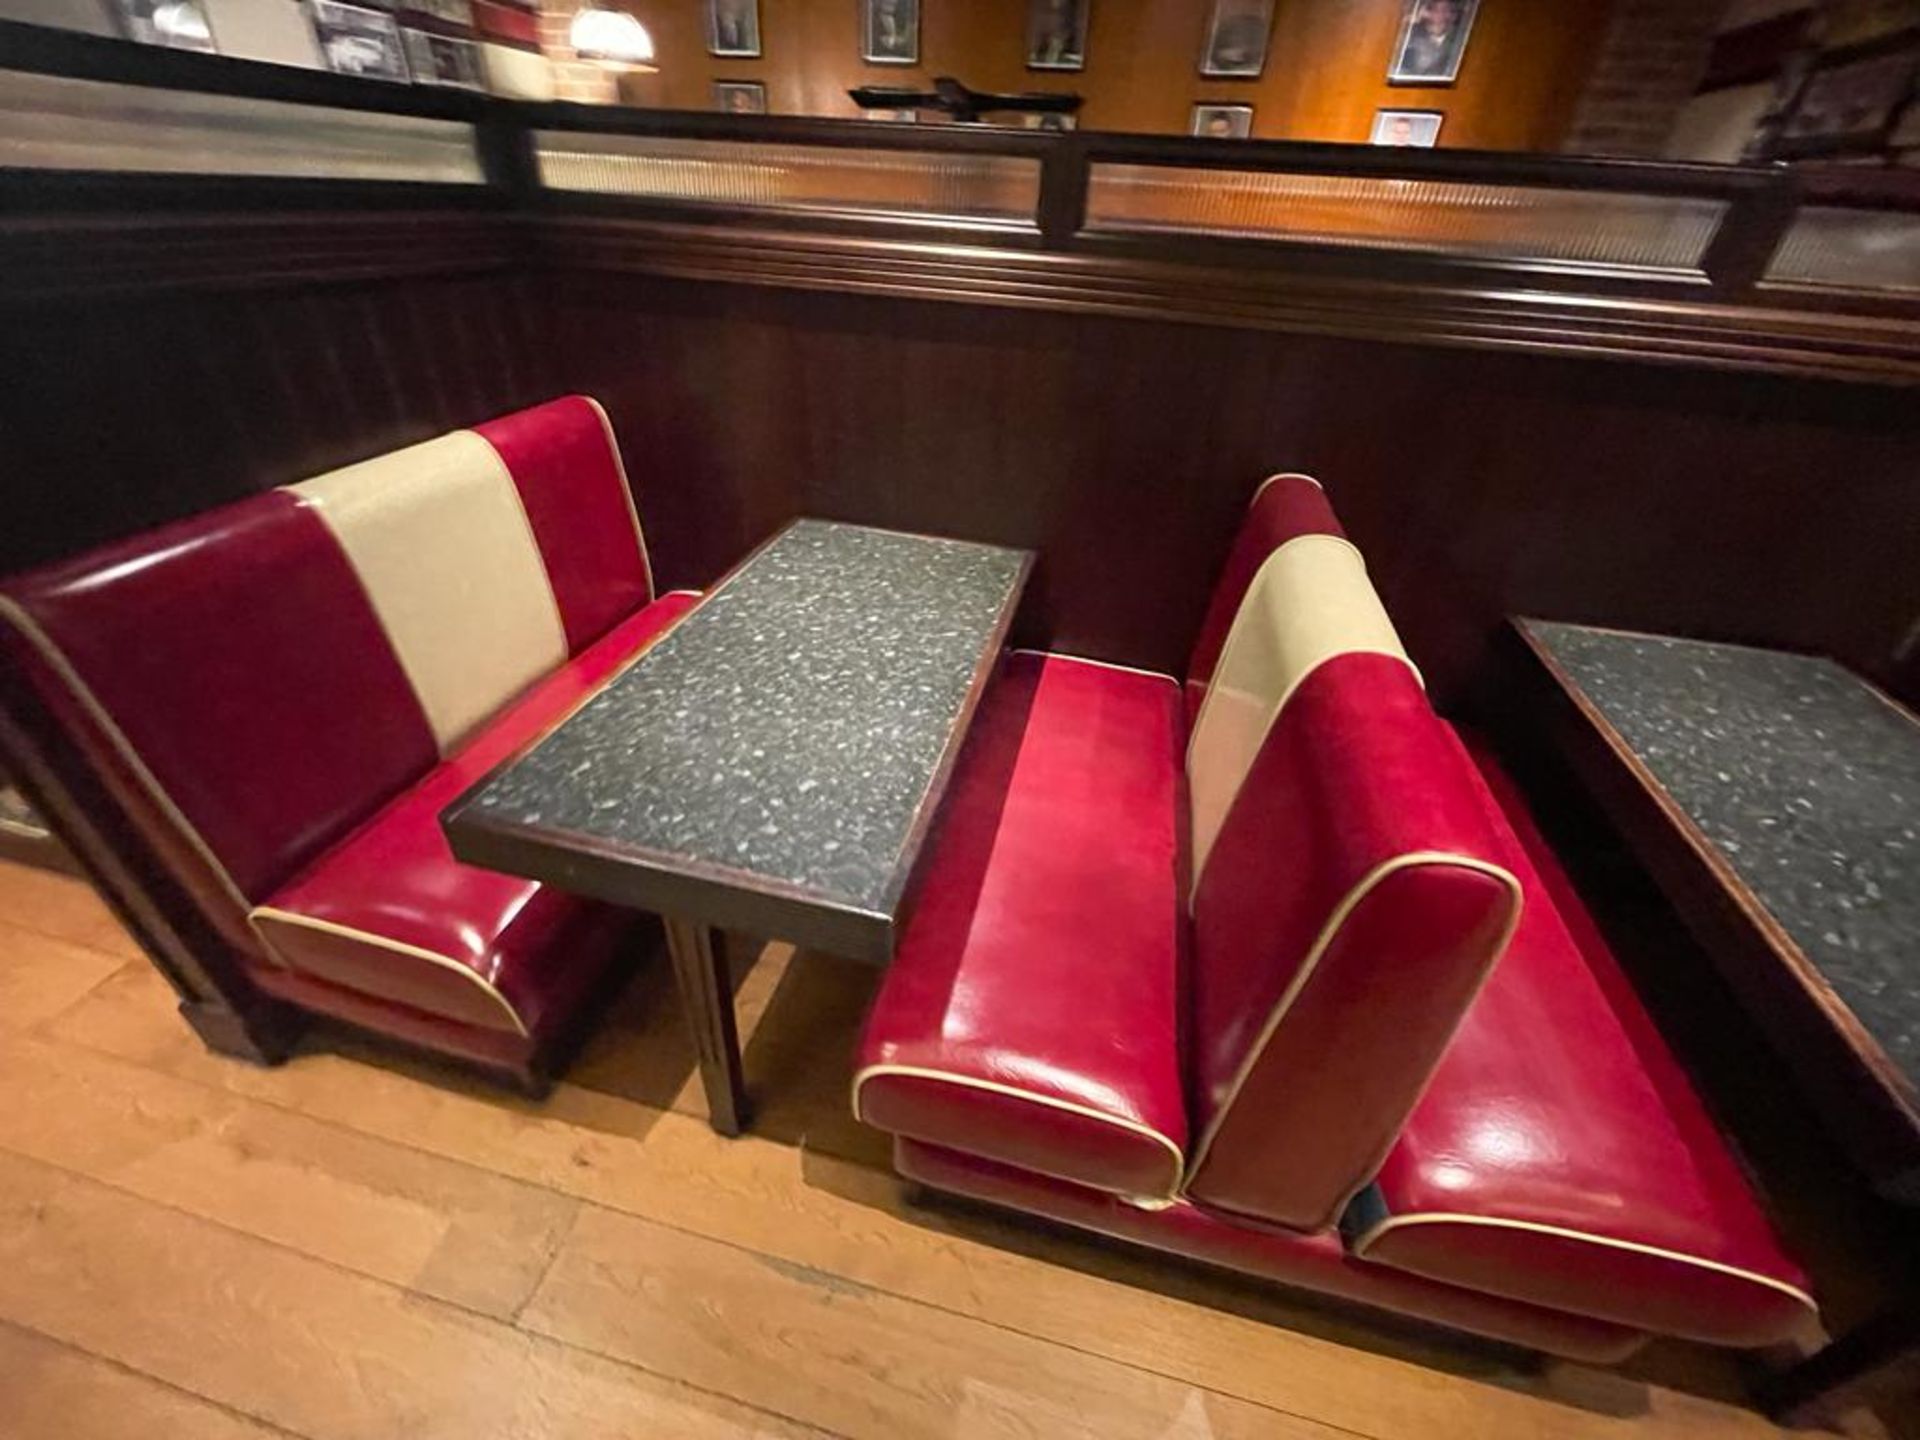 Selection of Double Seating Benches and Dining Tables to Seat Upto 8 Persons - Retro 1950's American - Image 3 of 4